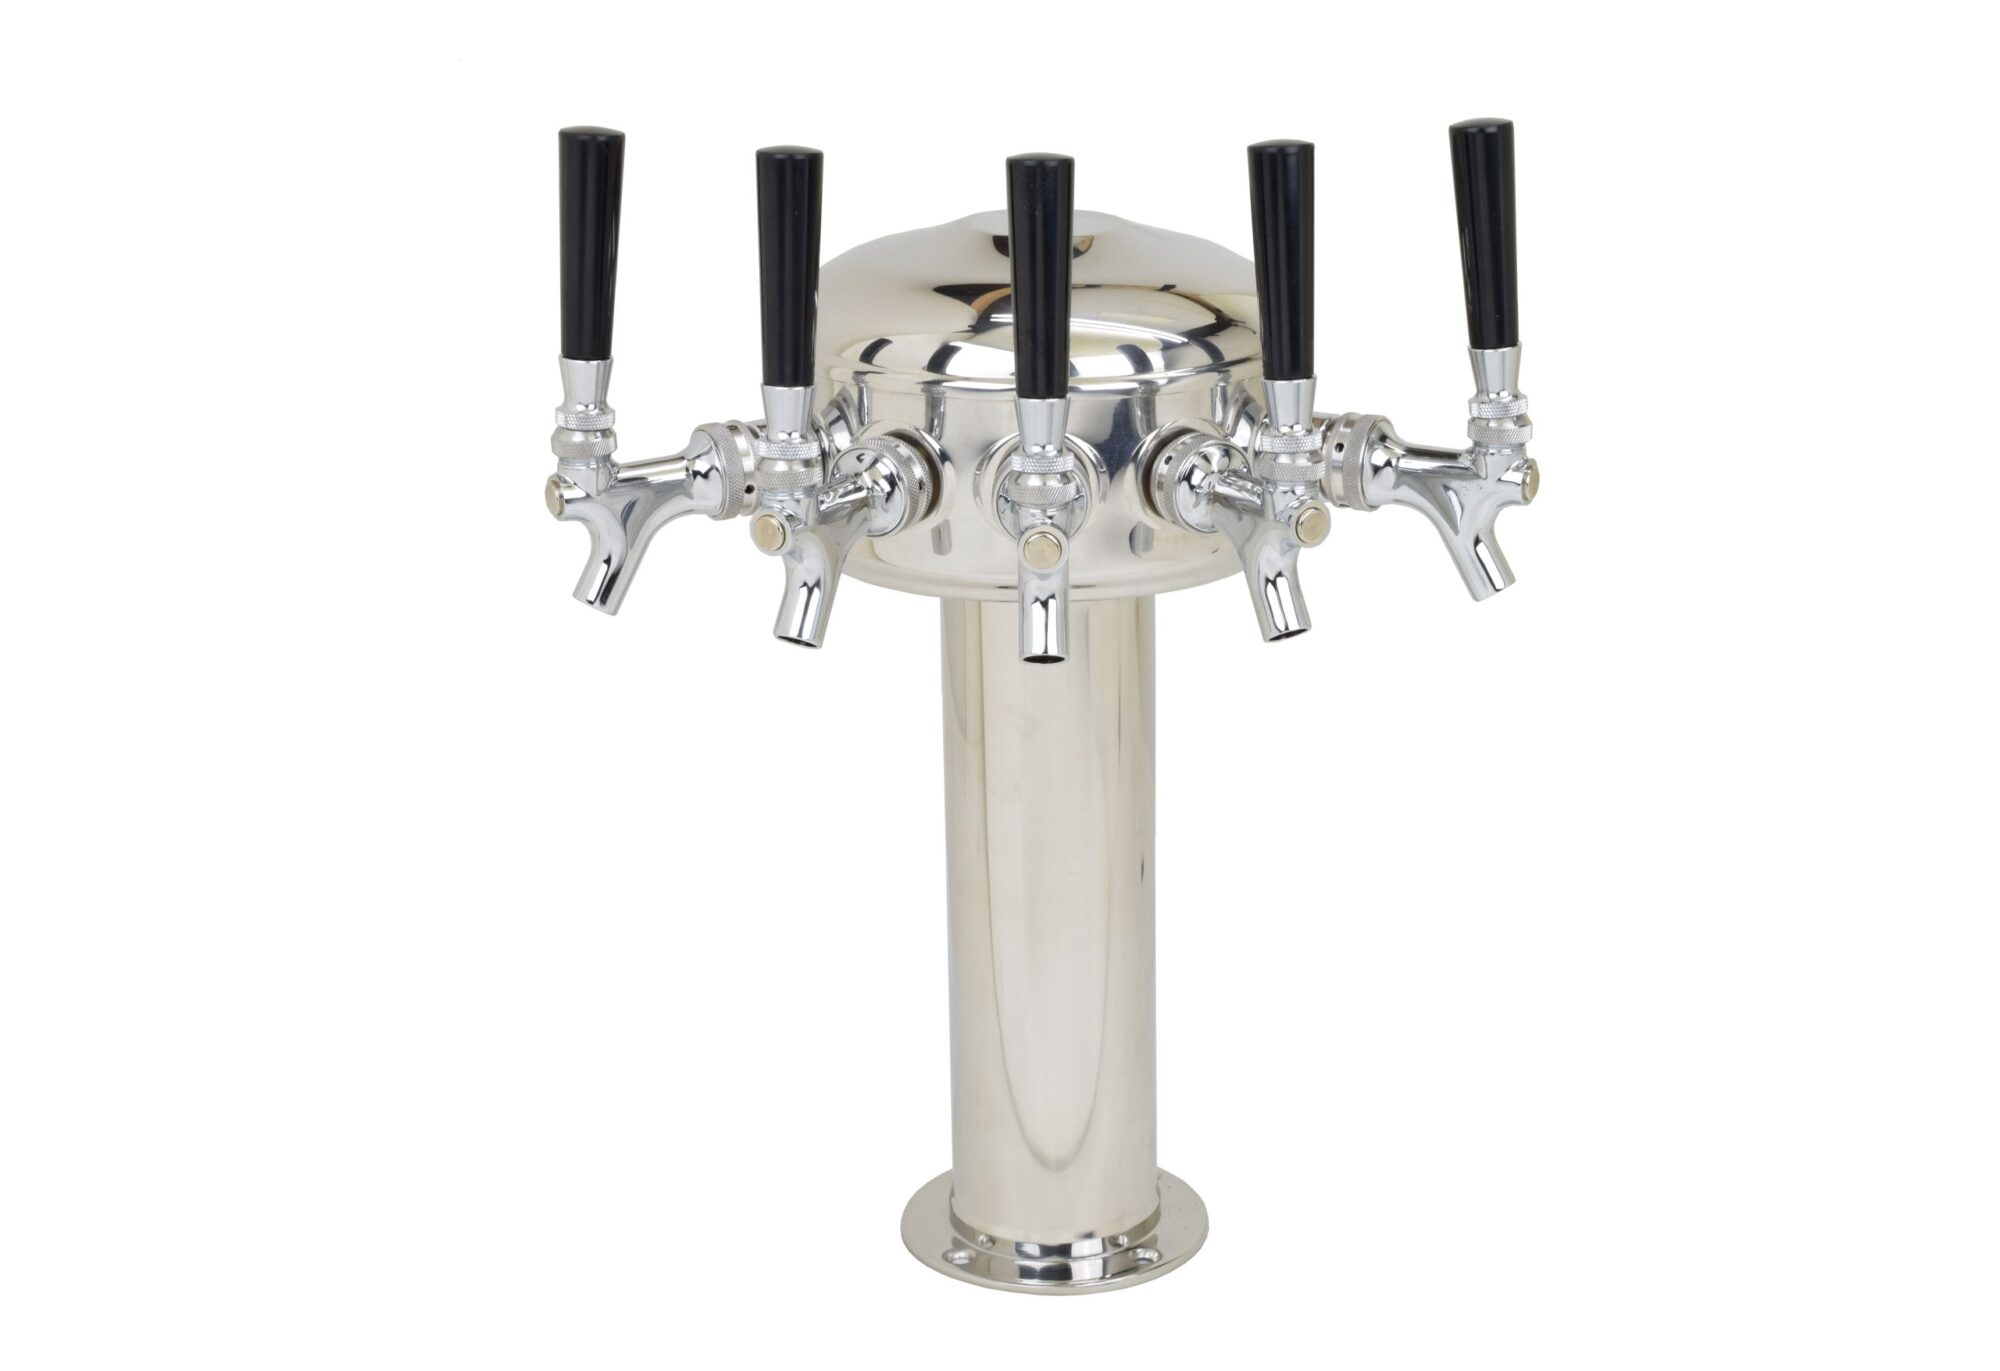 626C-5front Five Faucet Mini Mushroom Tower with Chrome Plated Faucets and Shanks